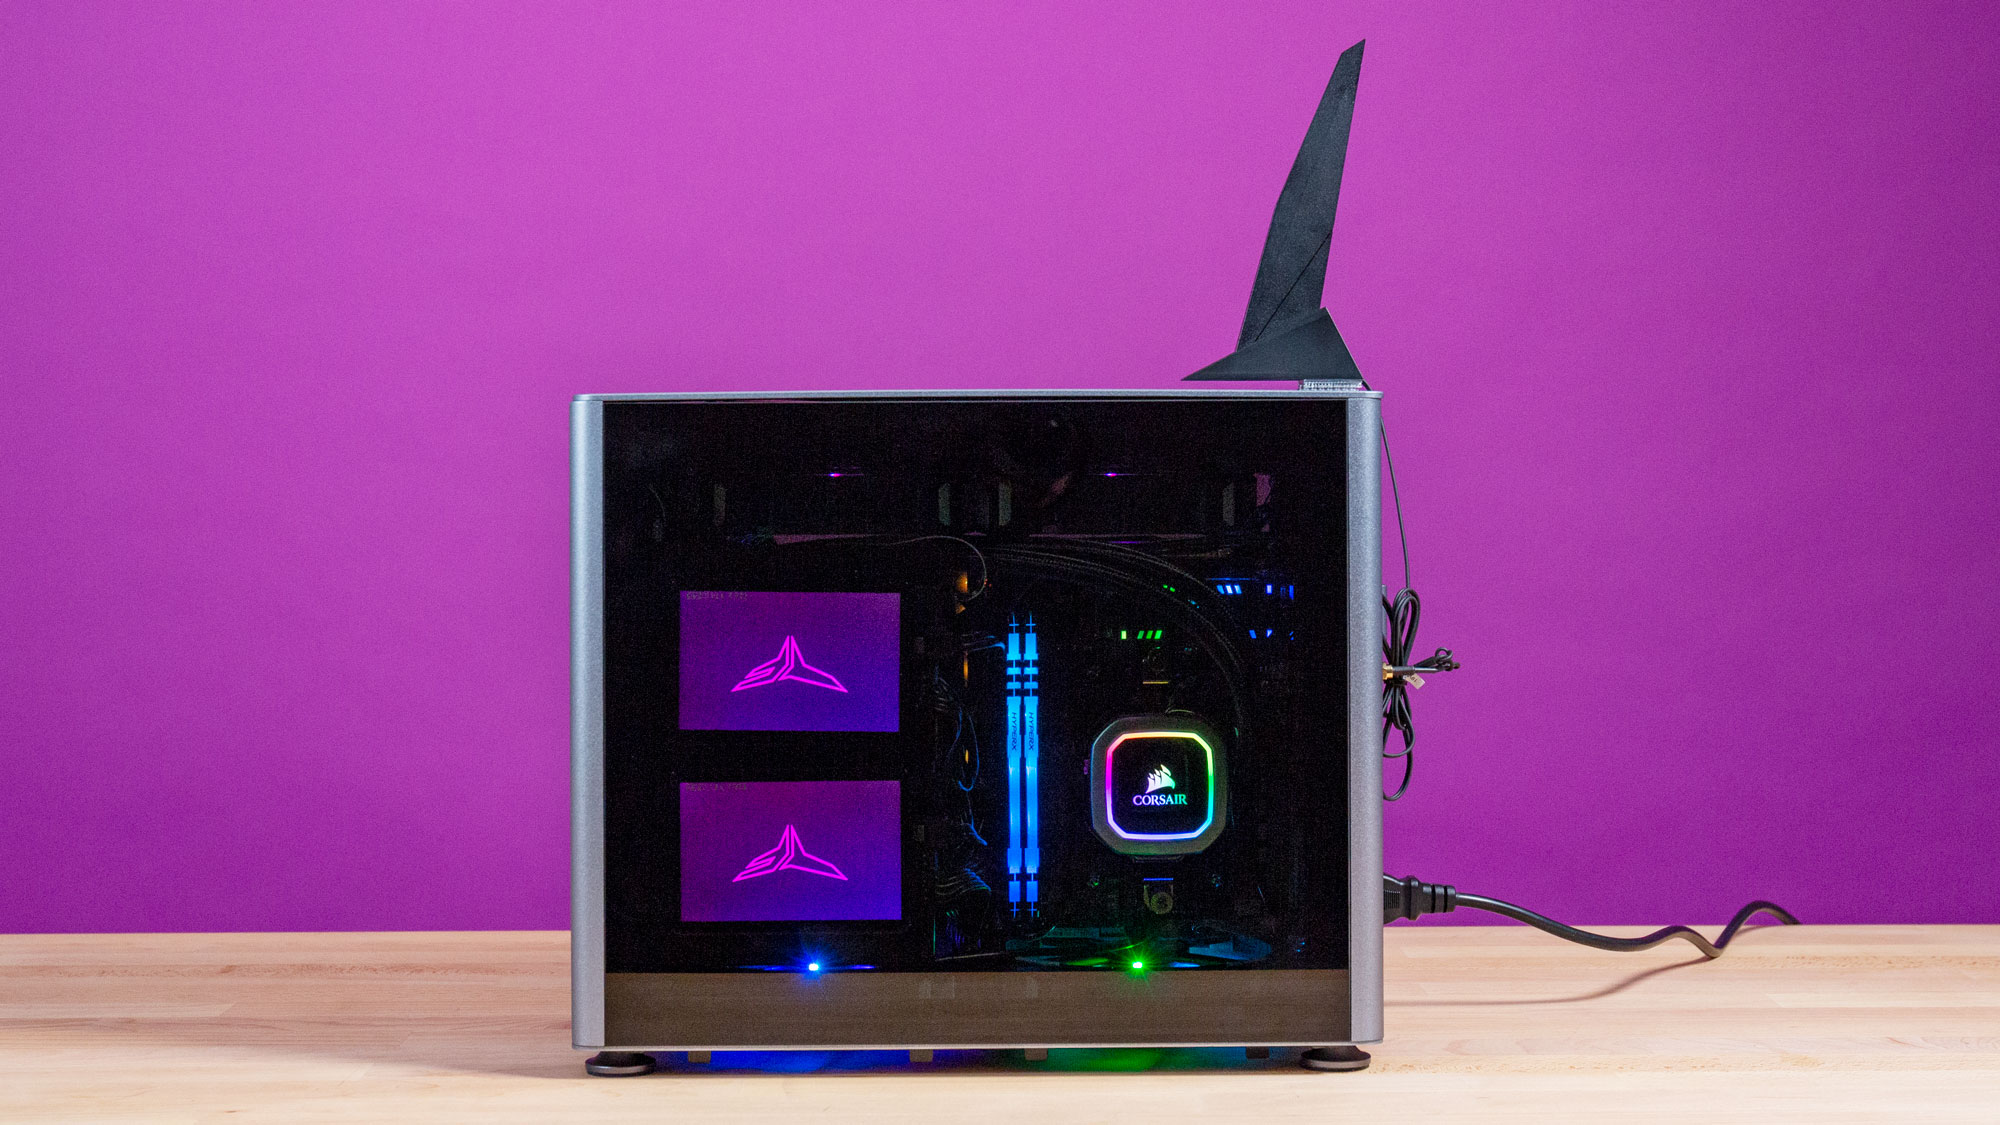 The RGBaby: How Built a Mini ITX RGB Gaming Hardware